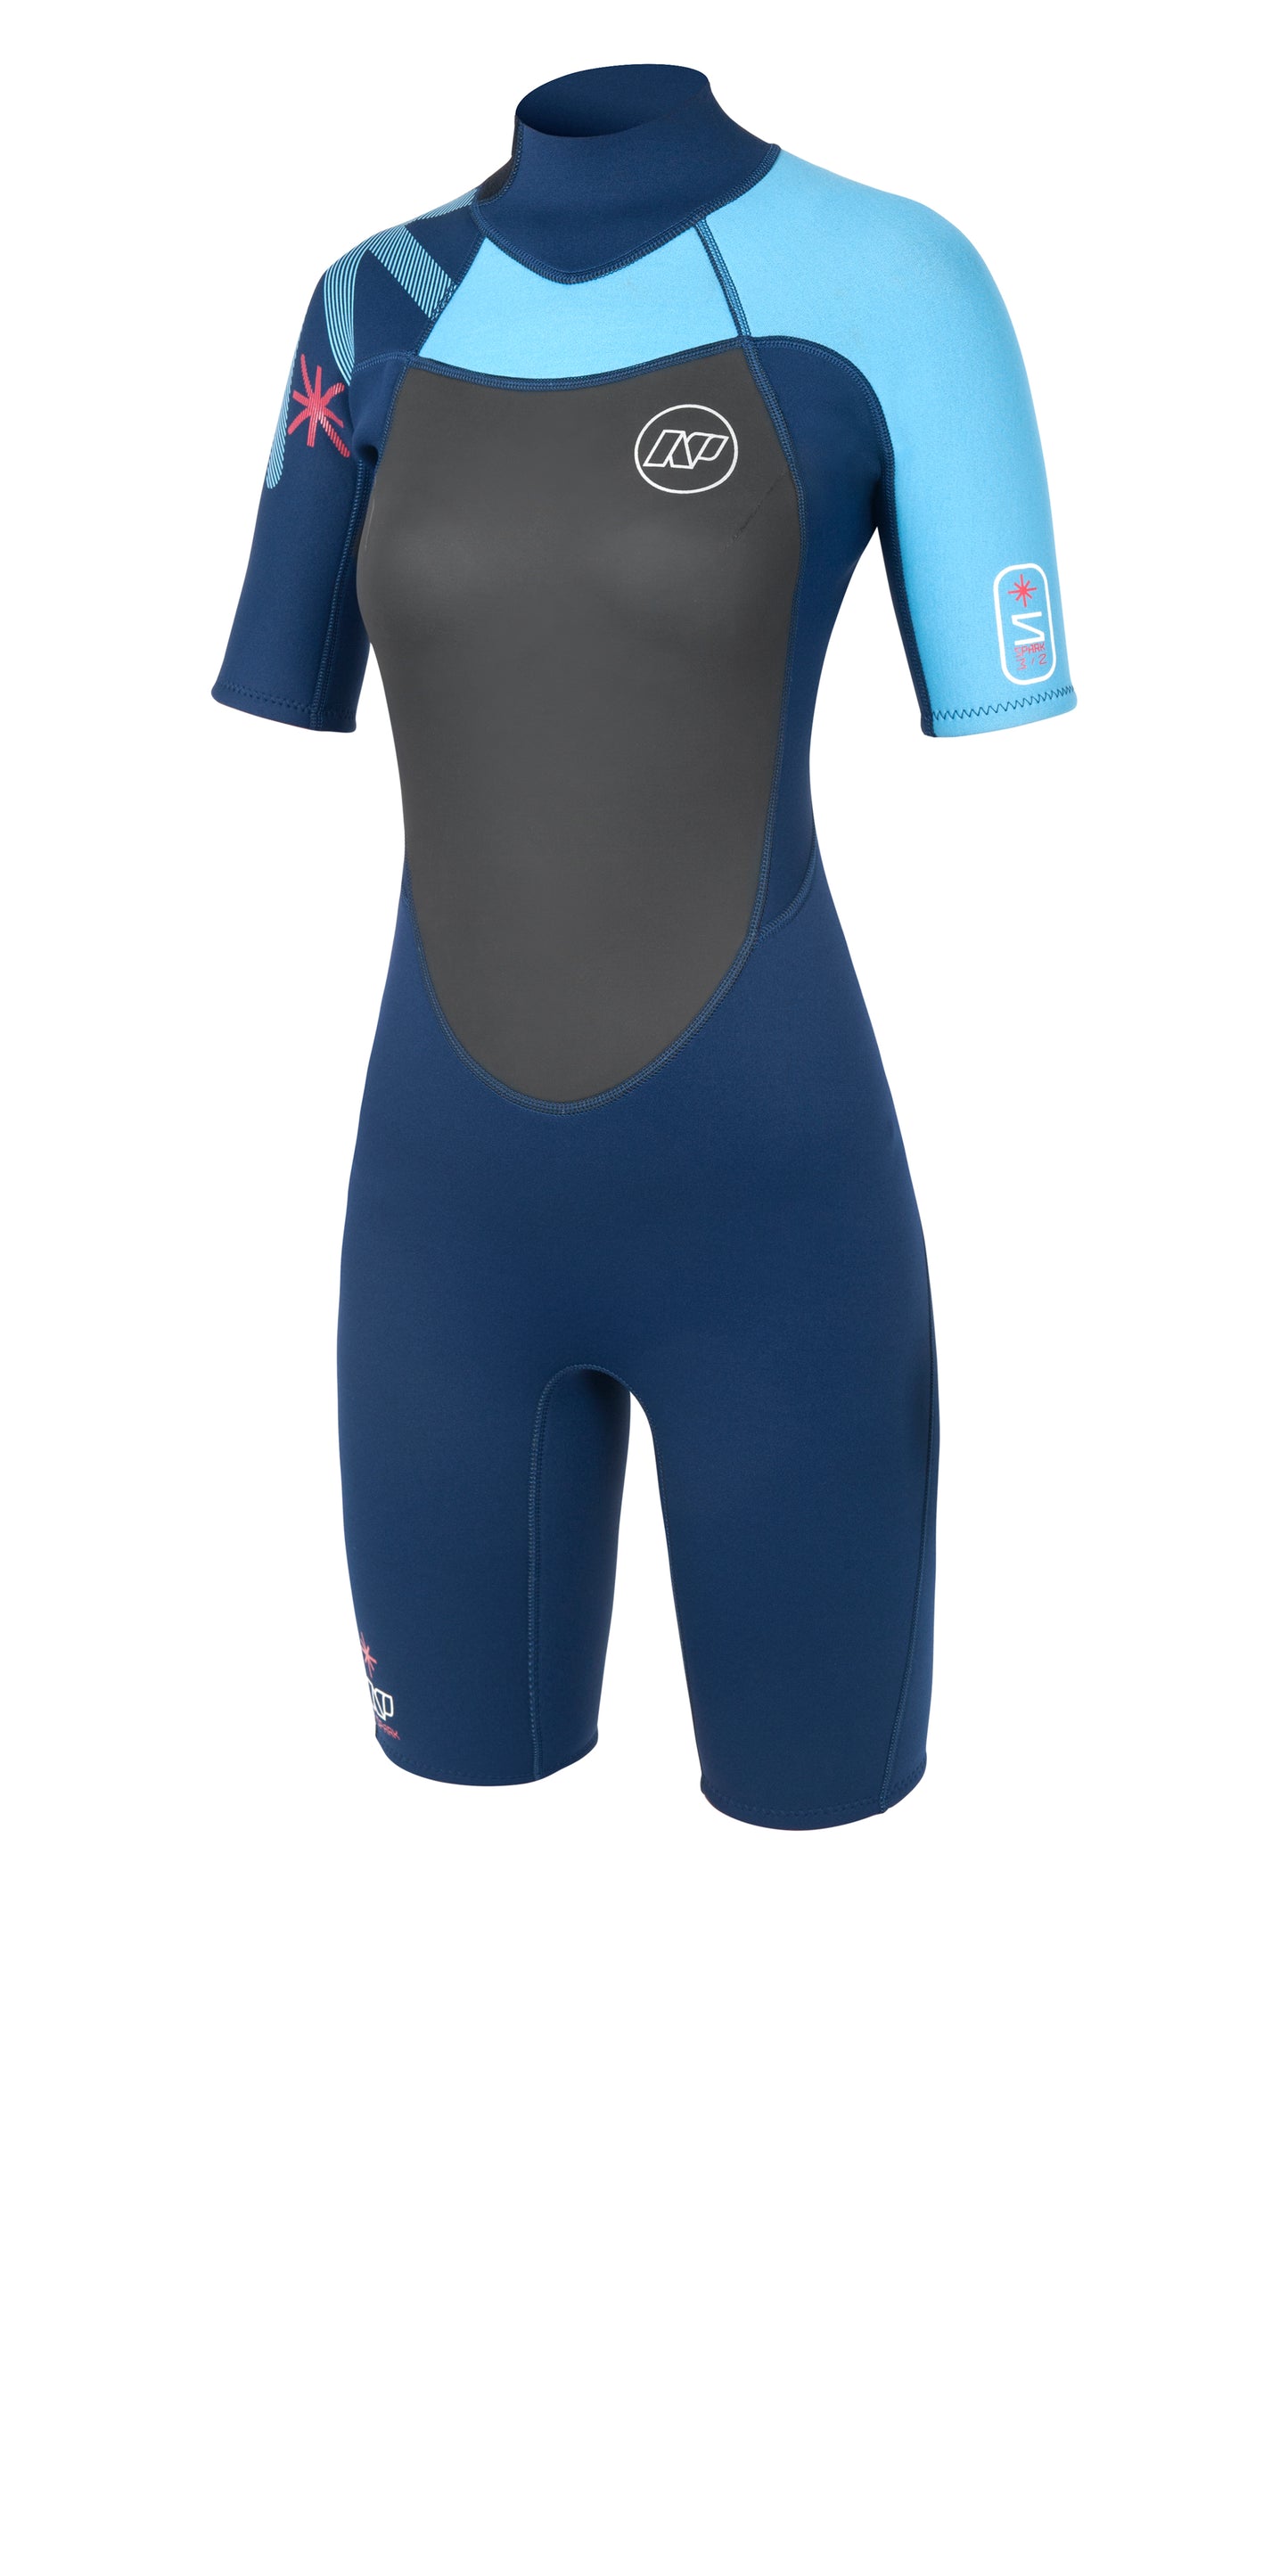 Neil Pryde Spark Womens Shorty 2-2 Wetsuit  - 50% off